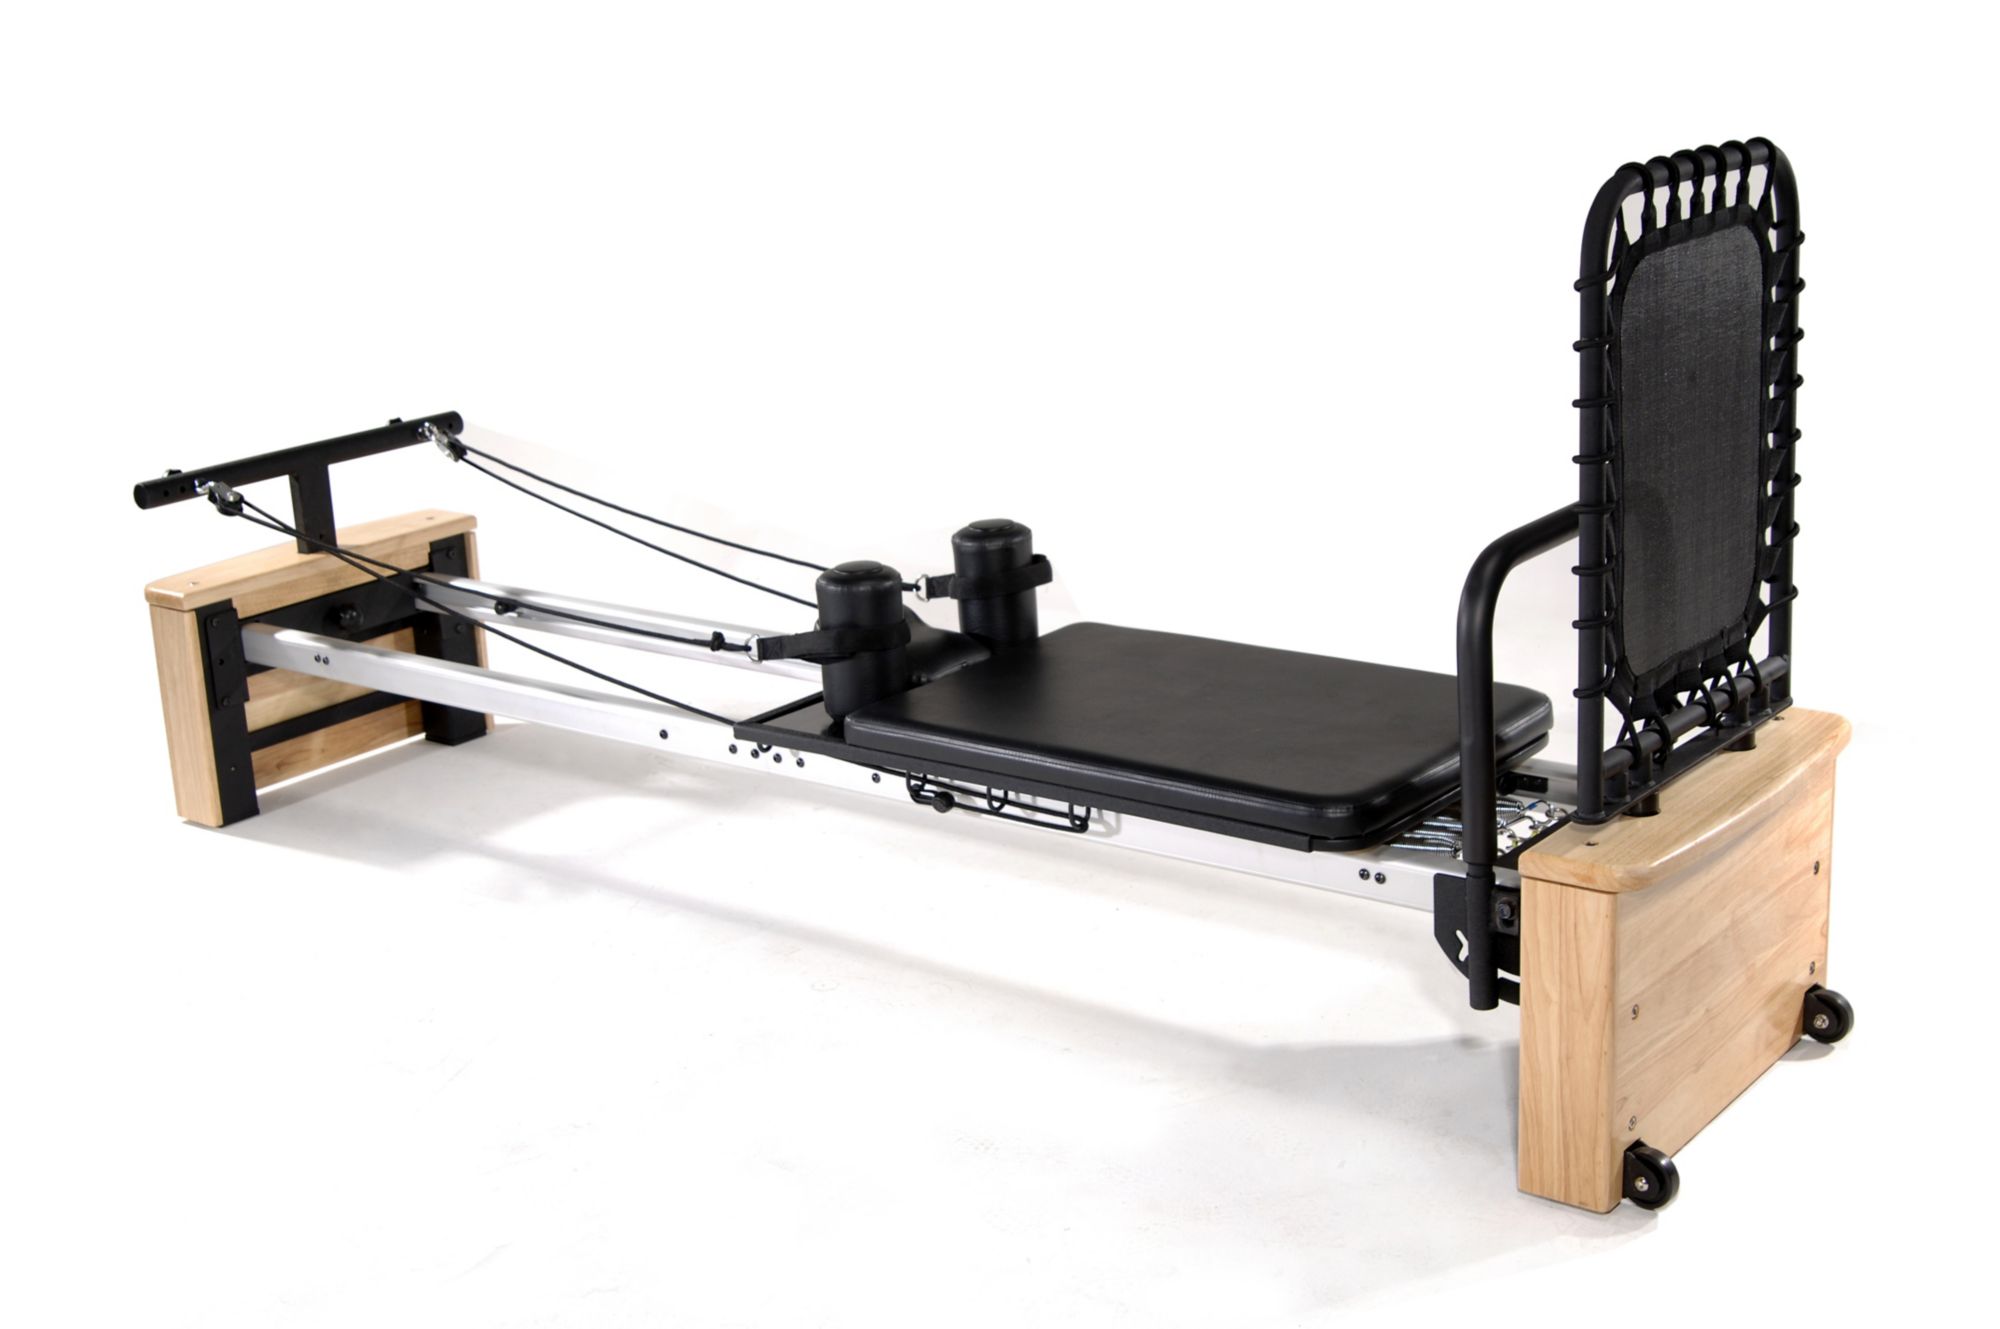 AeroPilates Reformer Stand - Add-on Pilates Accessories for